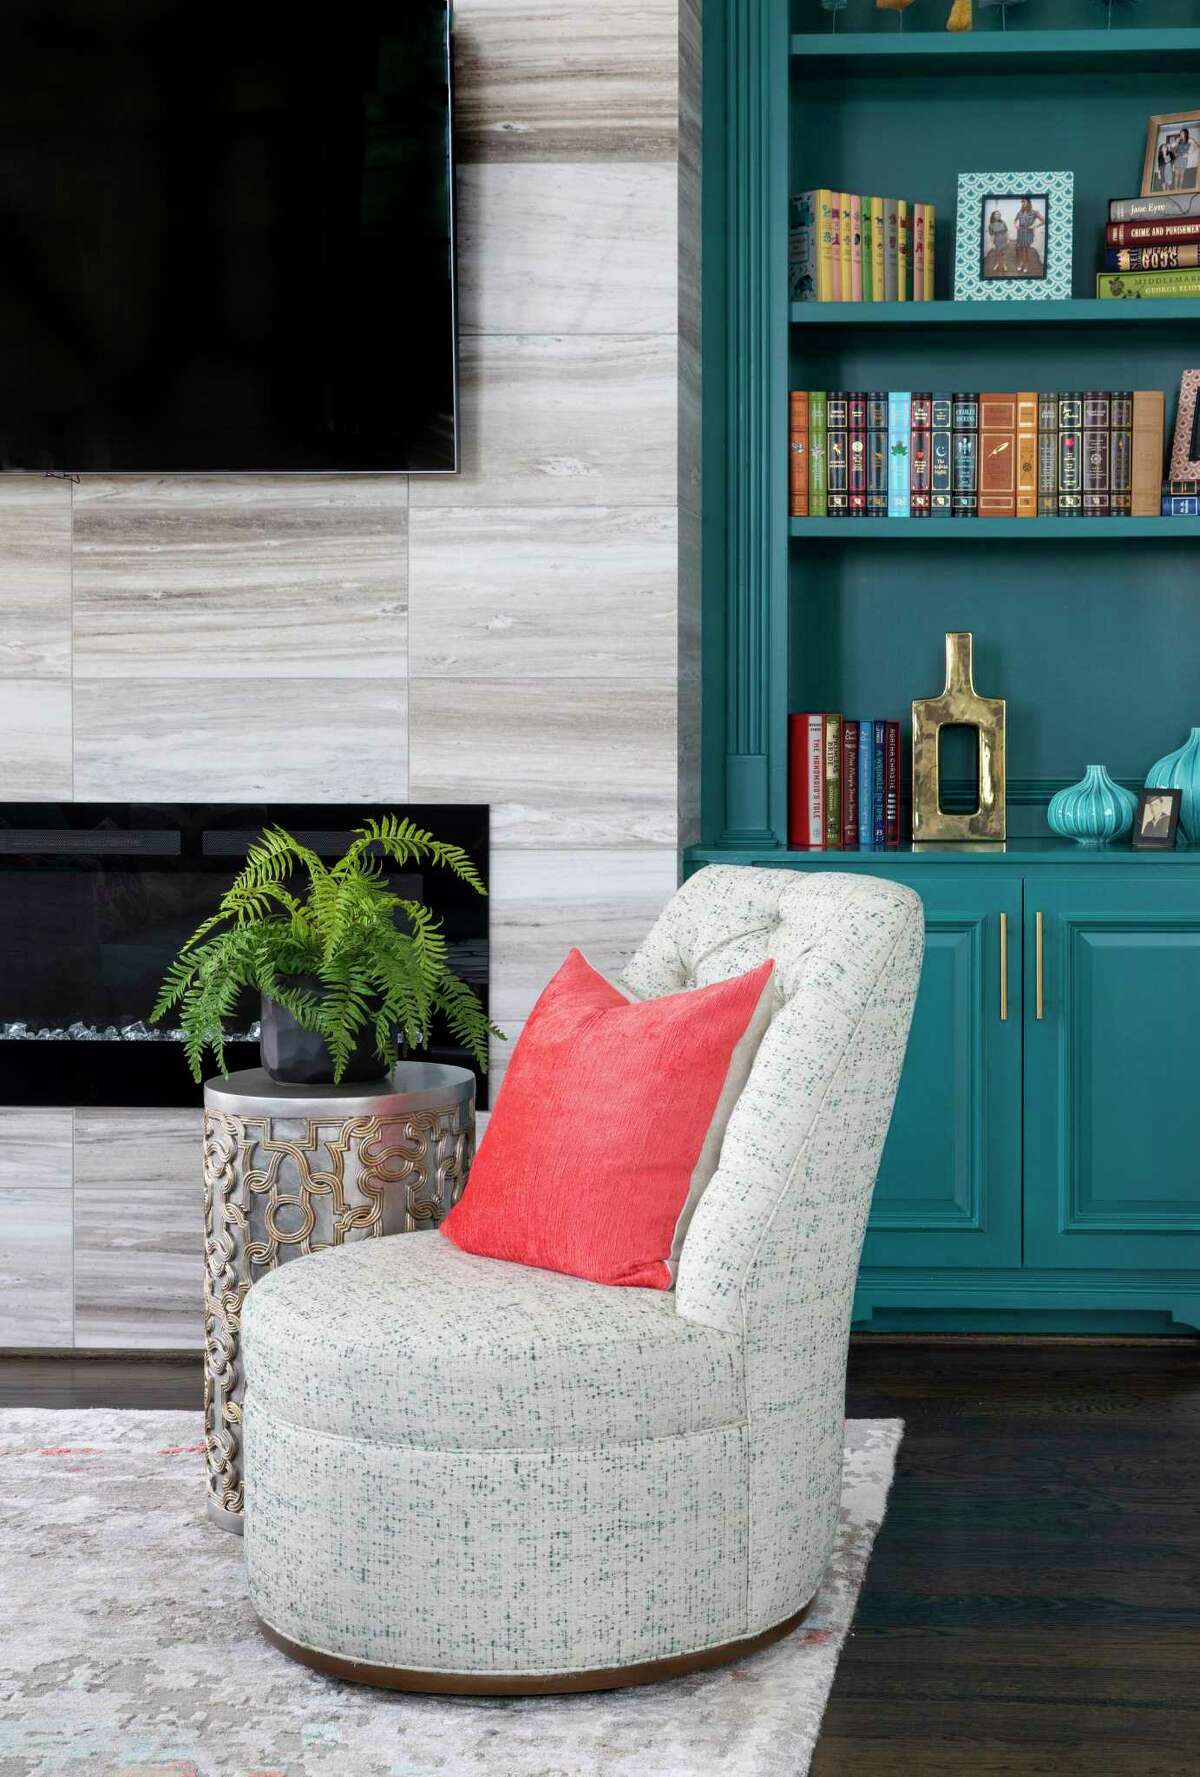 Built-in cabinets that flank the fireplace were painted teal.